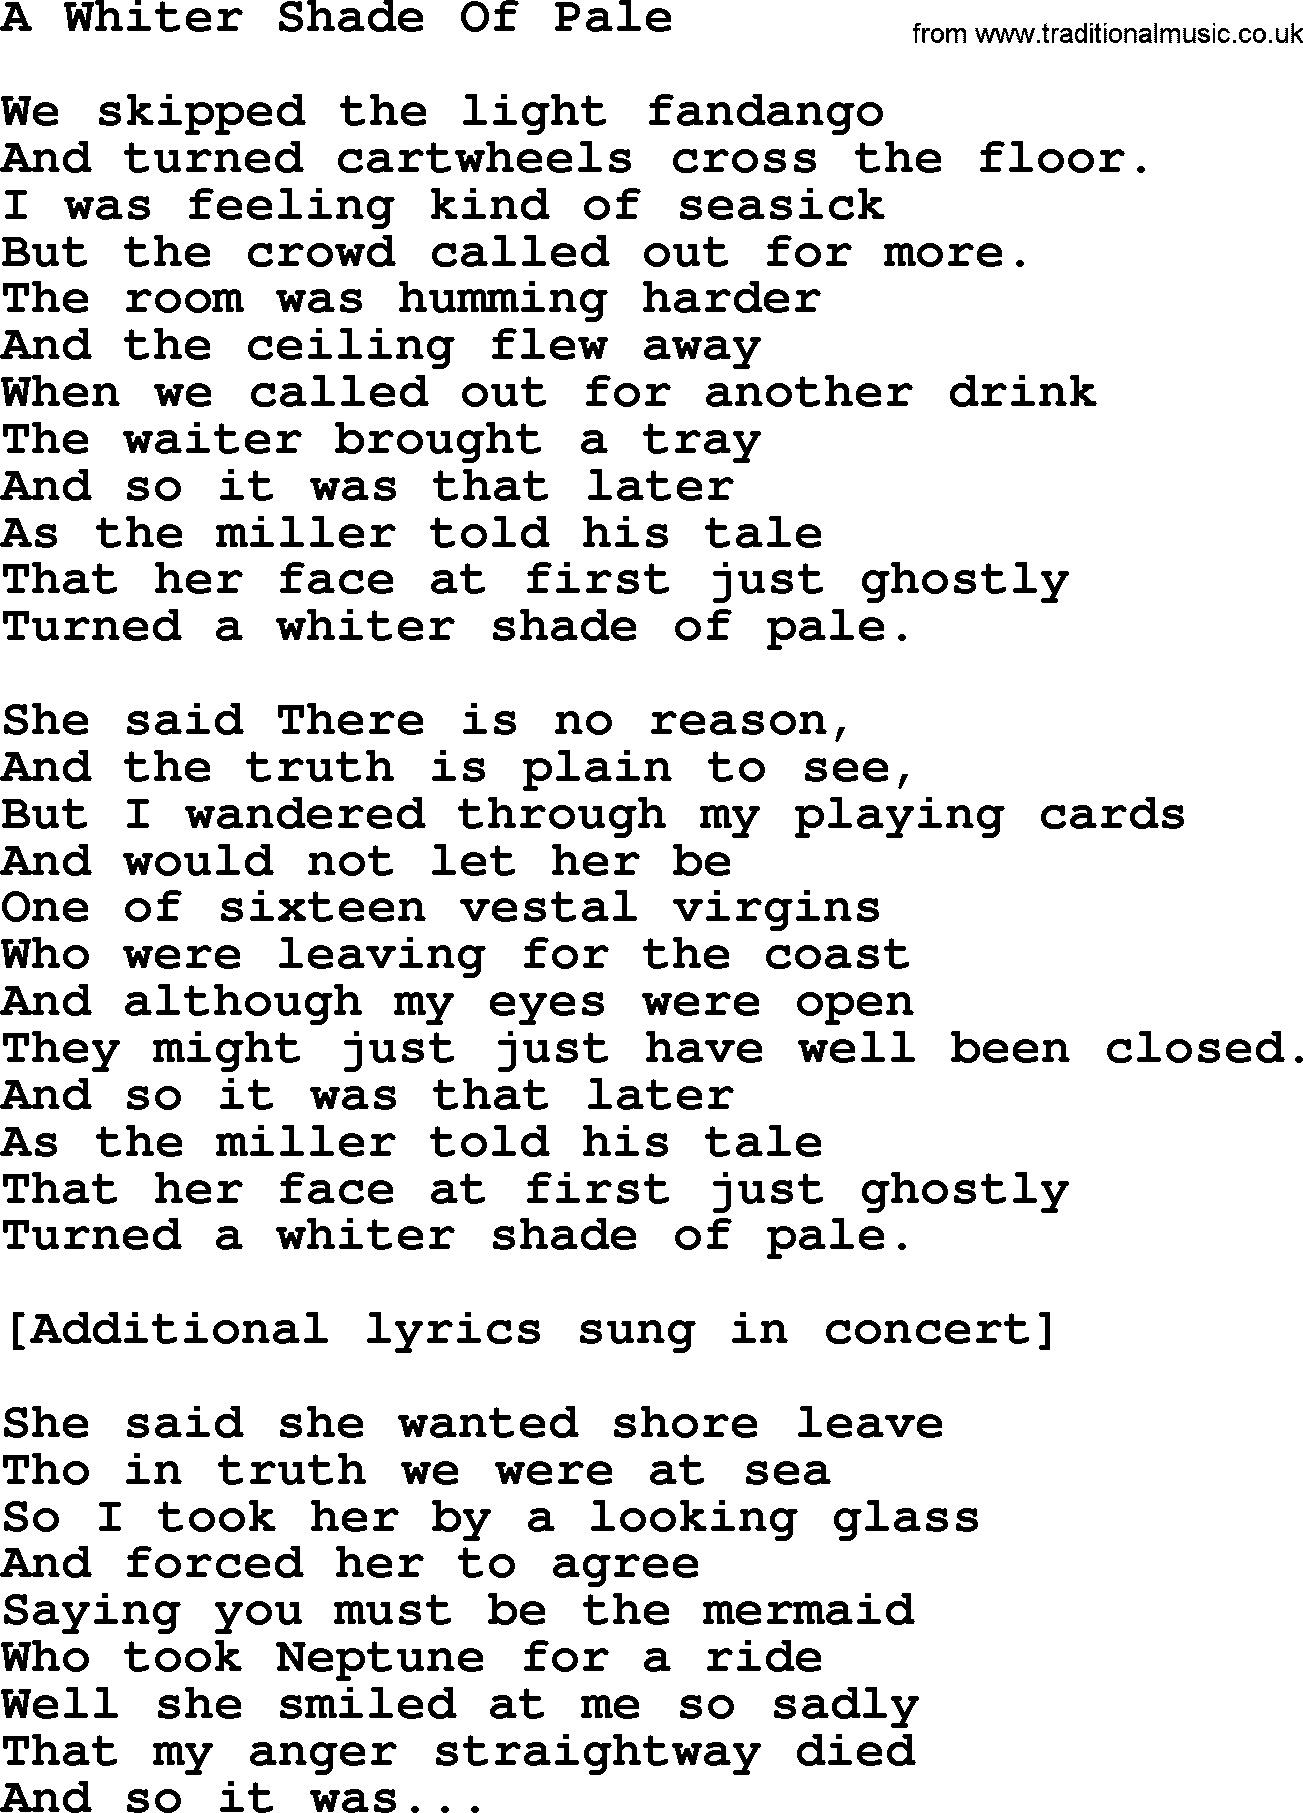 Willie Nelson song: A Whiter Shade Of Pale lyrics